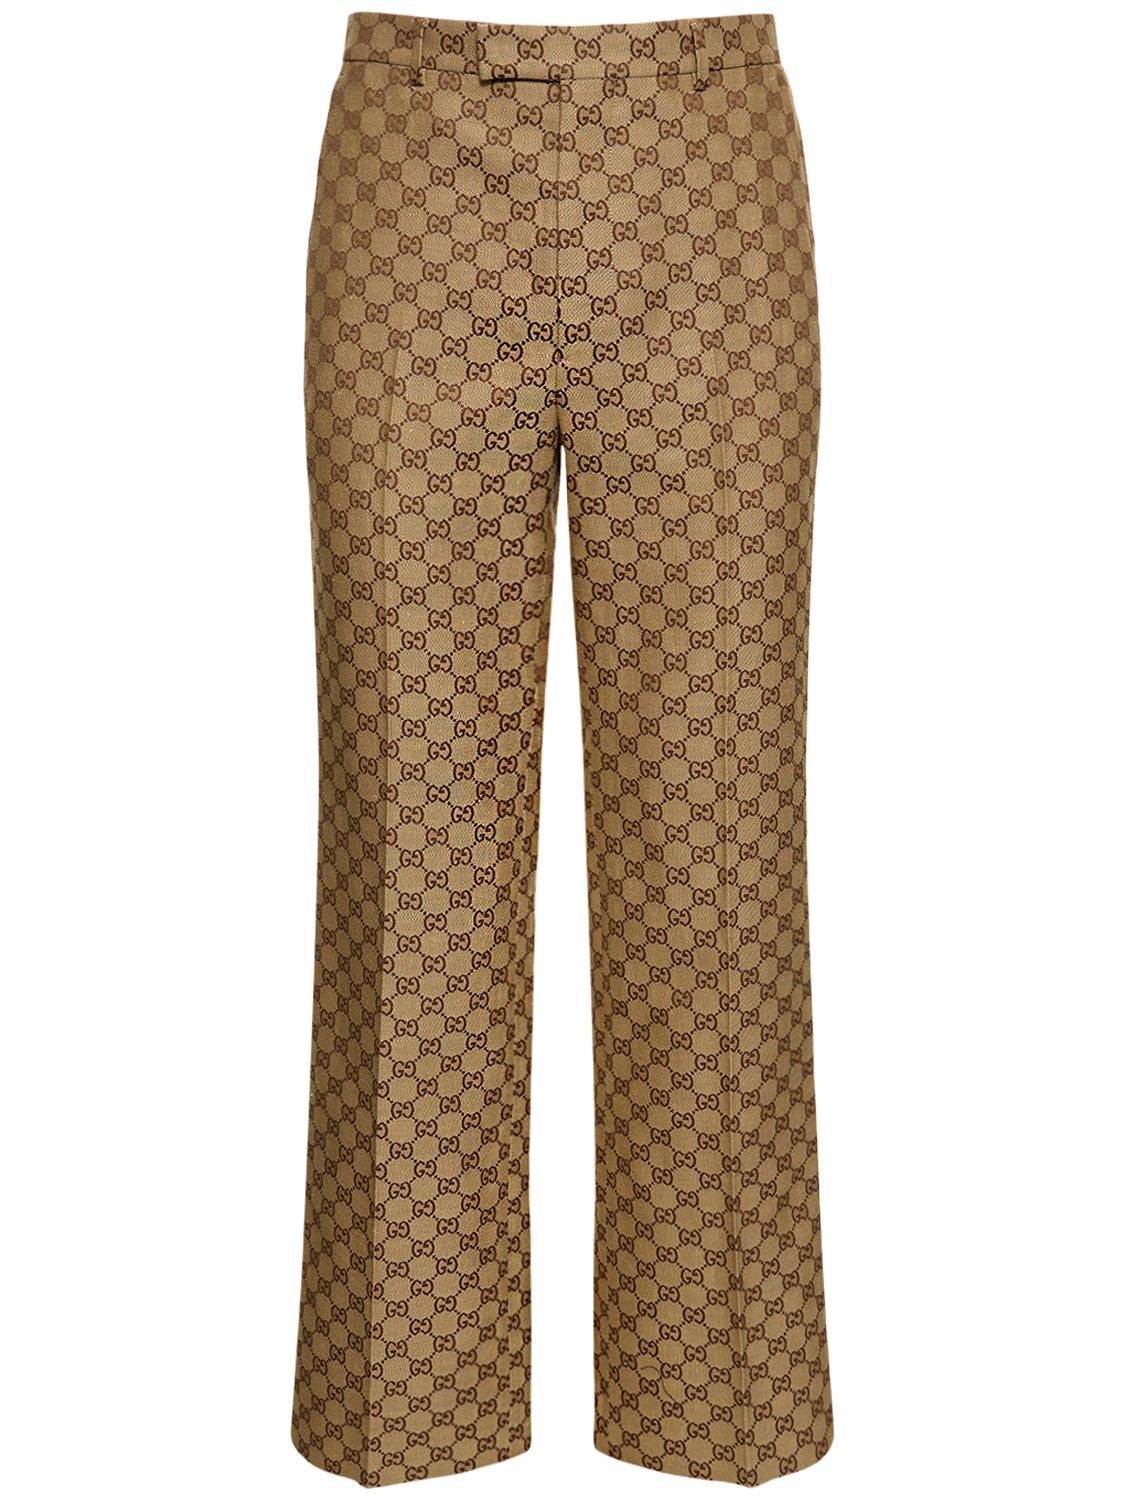 Gucci Summer Gg Supreme Linen Blend Trousers In Camel,ebony